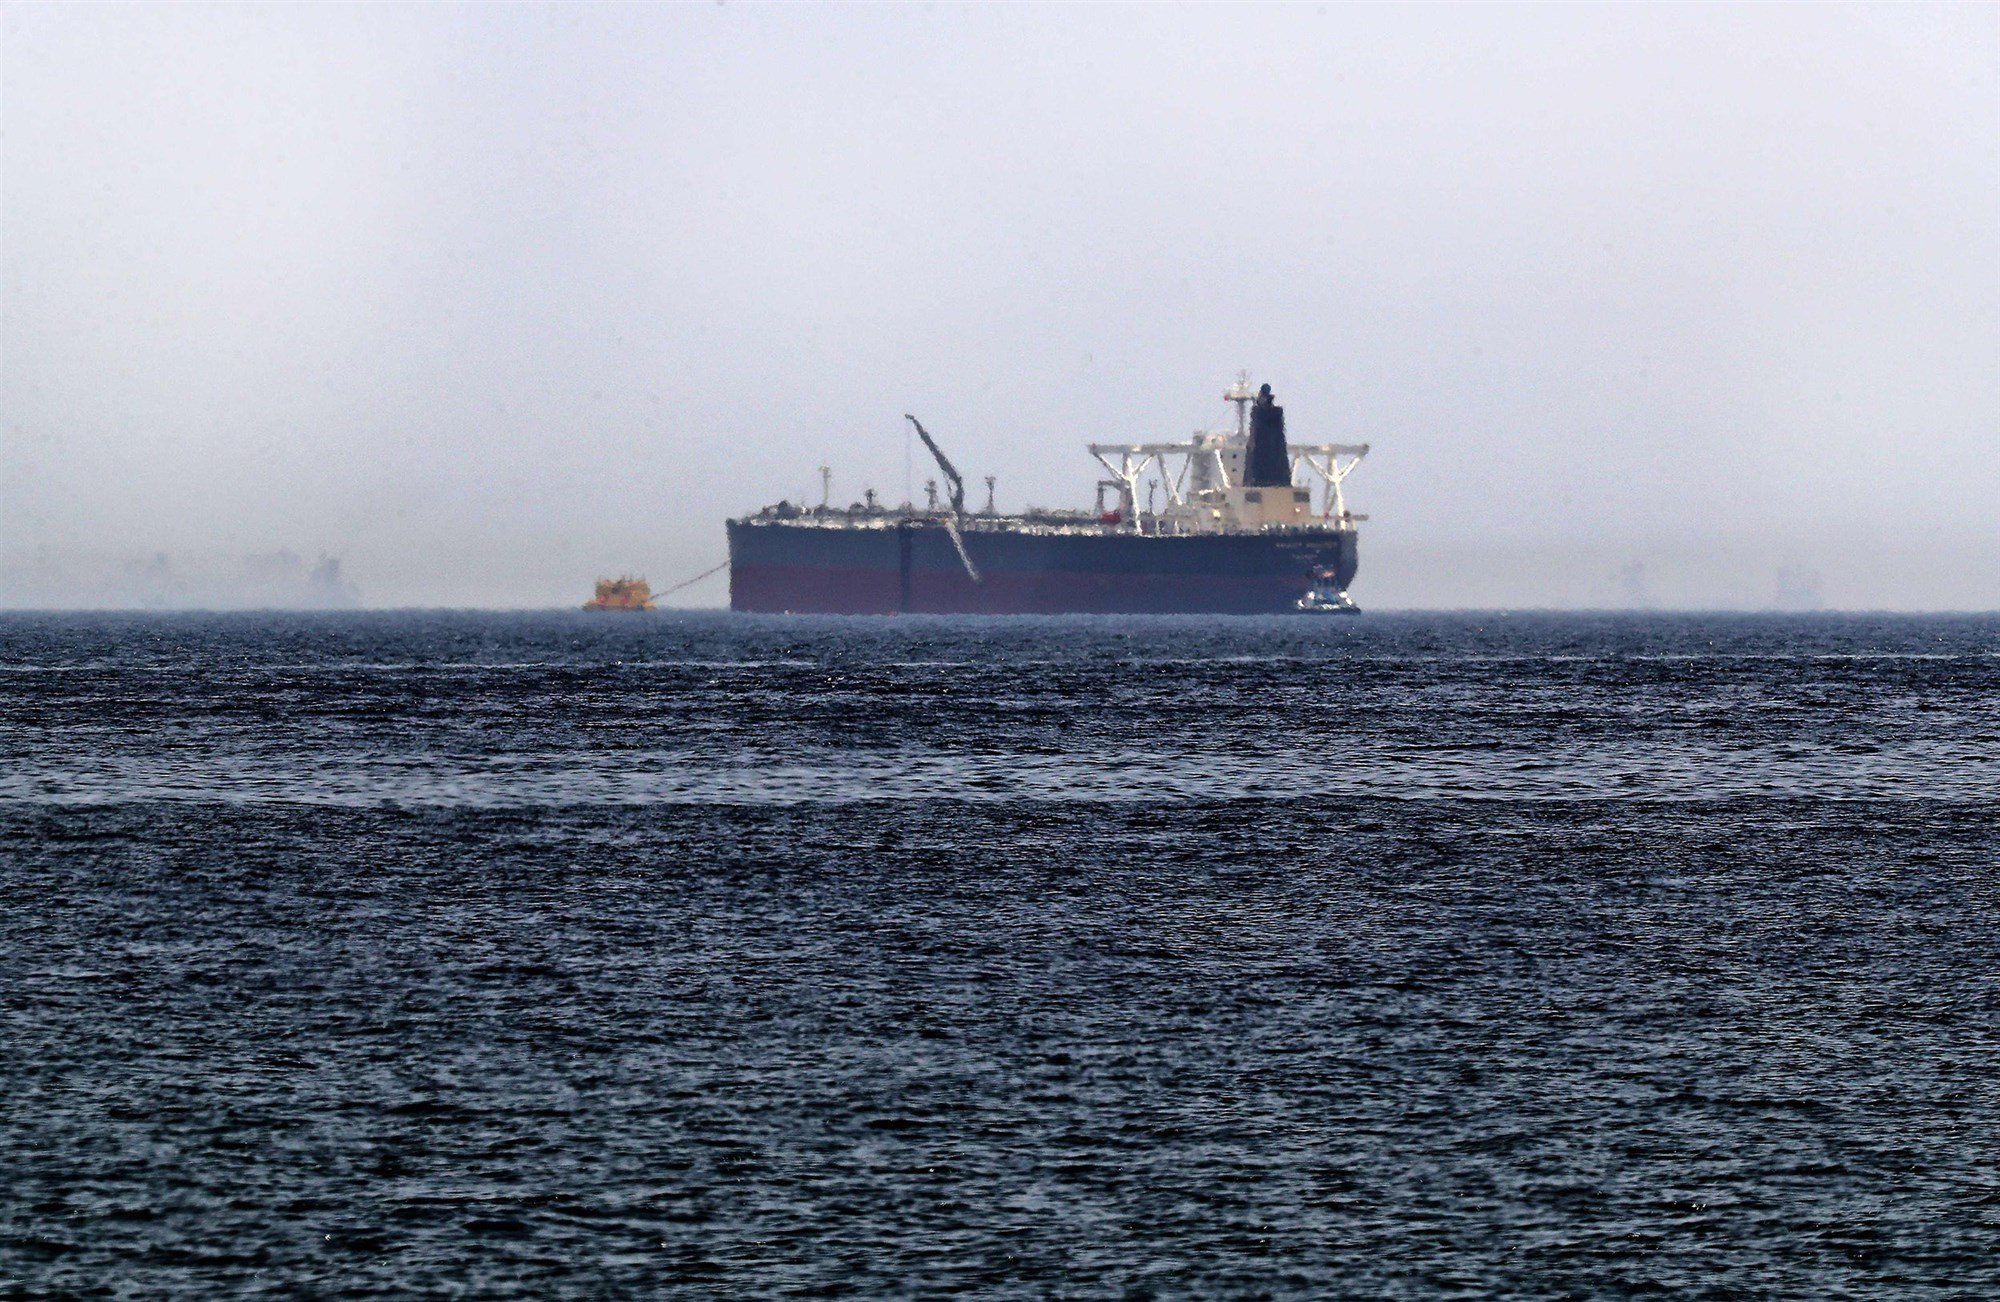 May 12, 2019: Four tankers allegedly sabotaged by Iran